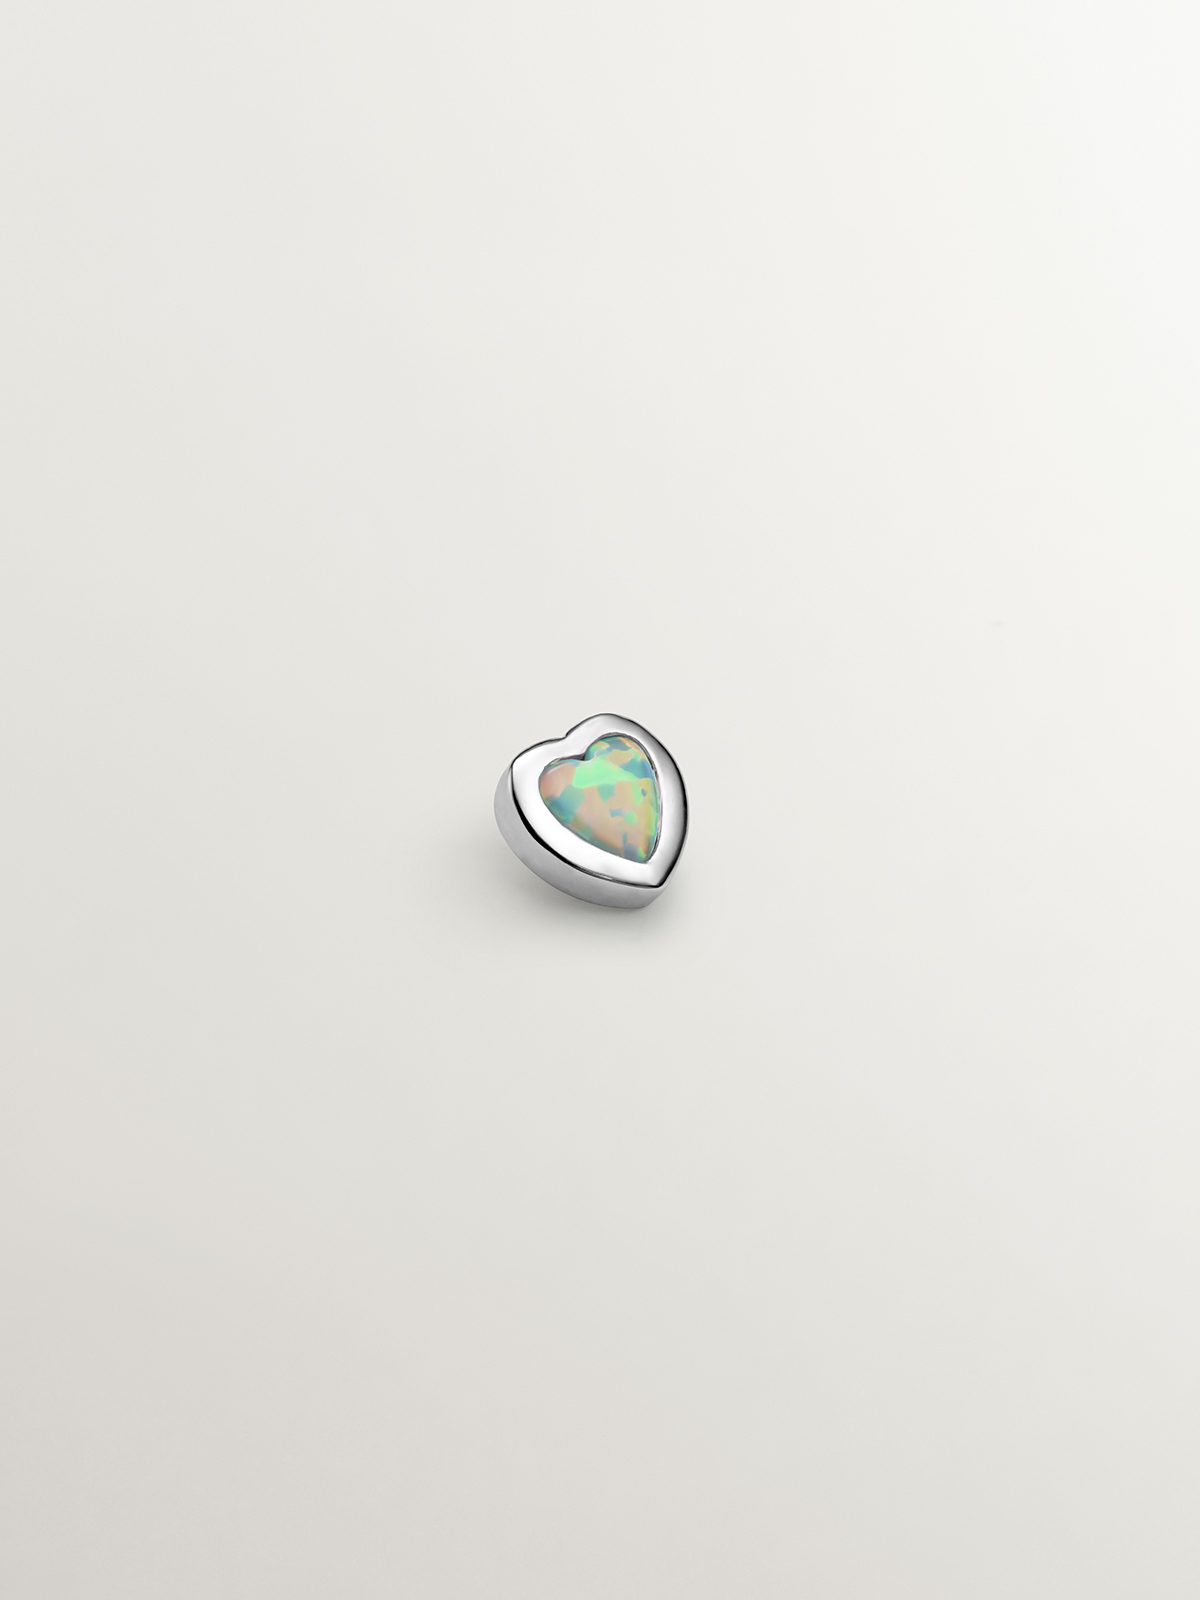 18K gold bank single piercing with turquoise opal